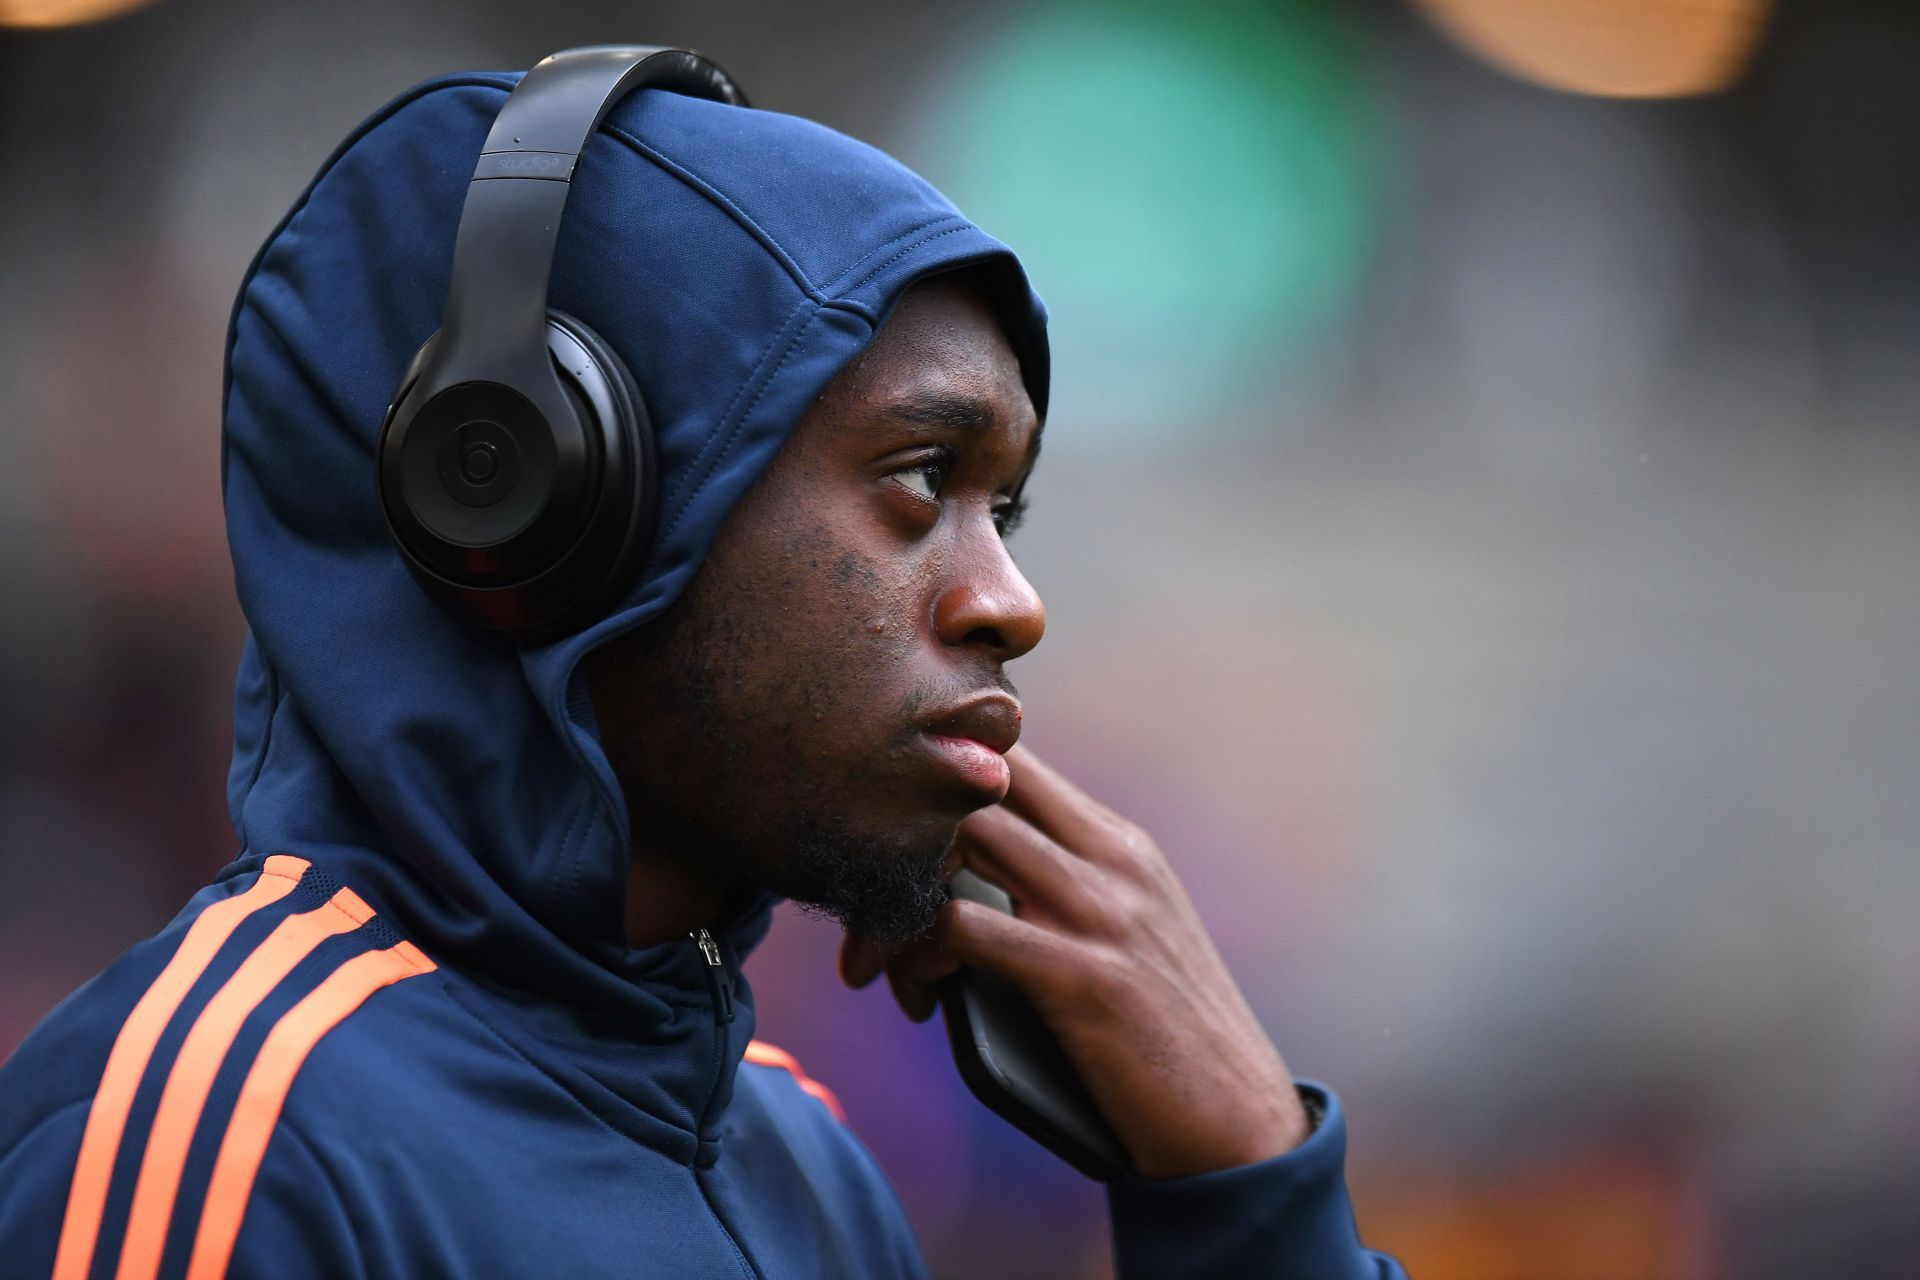 Wan-bissaka could be used as a centre-back by Moyes